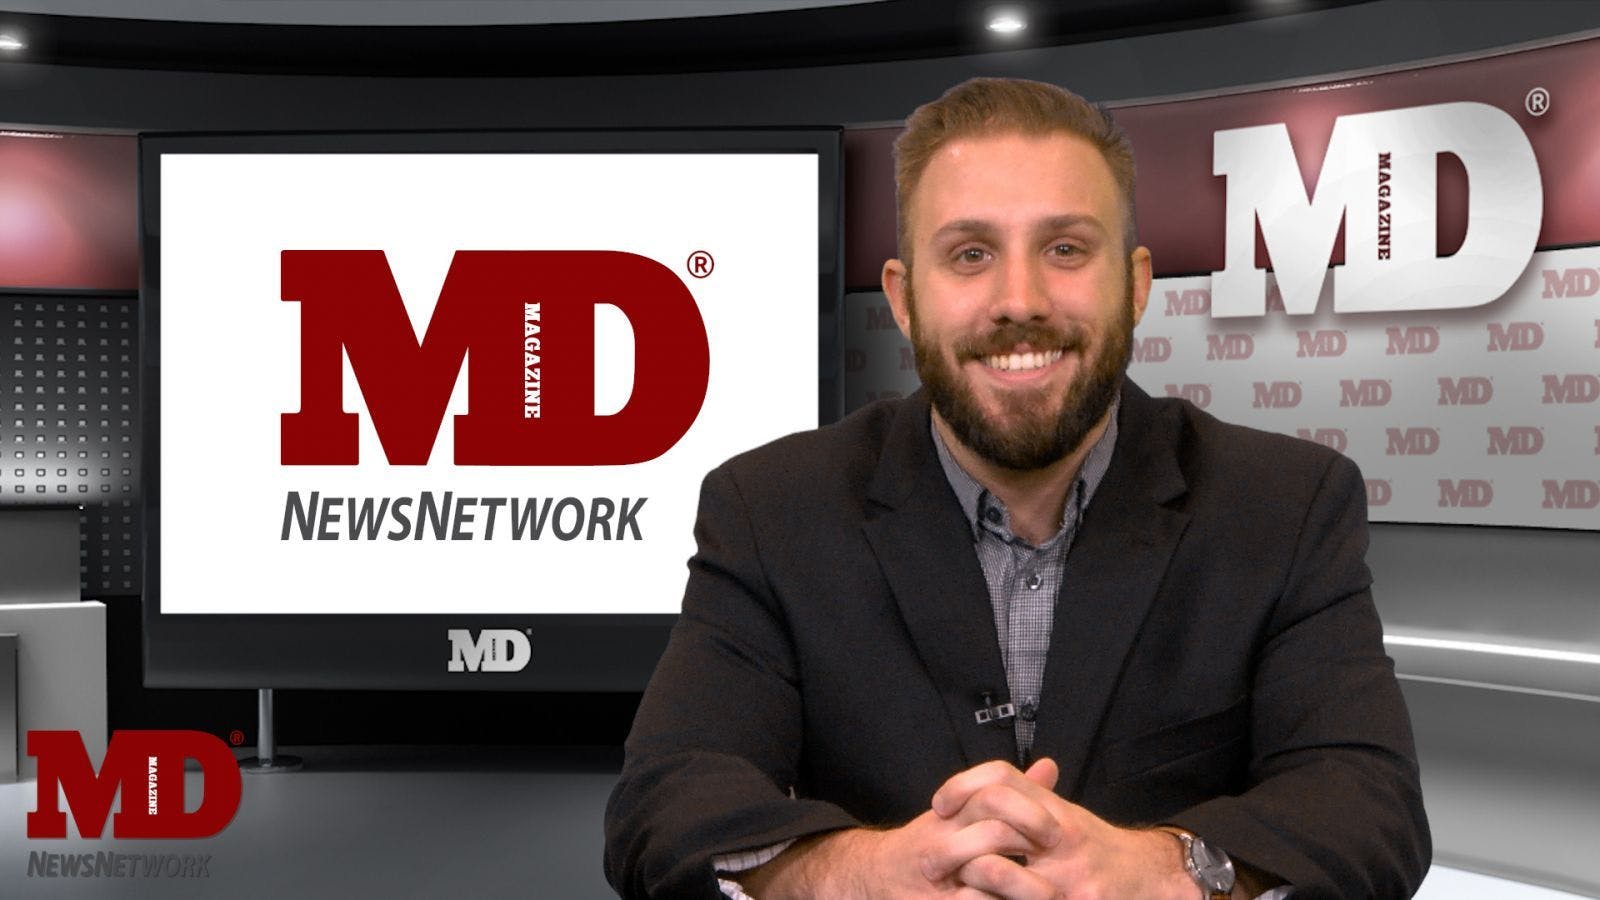 MDNN: AVATAR Therapy for Hallucinations, Smartphone Camera Diagnoses, FDA Approves Mepolizumab, and Links Between MS and Vaccine